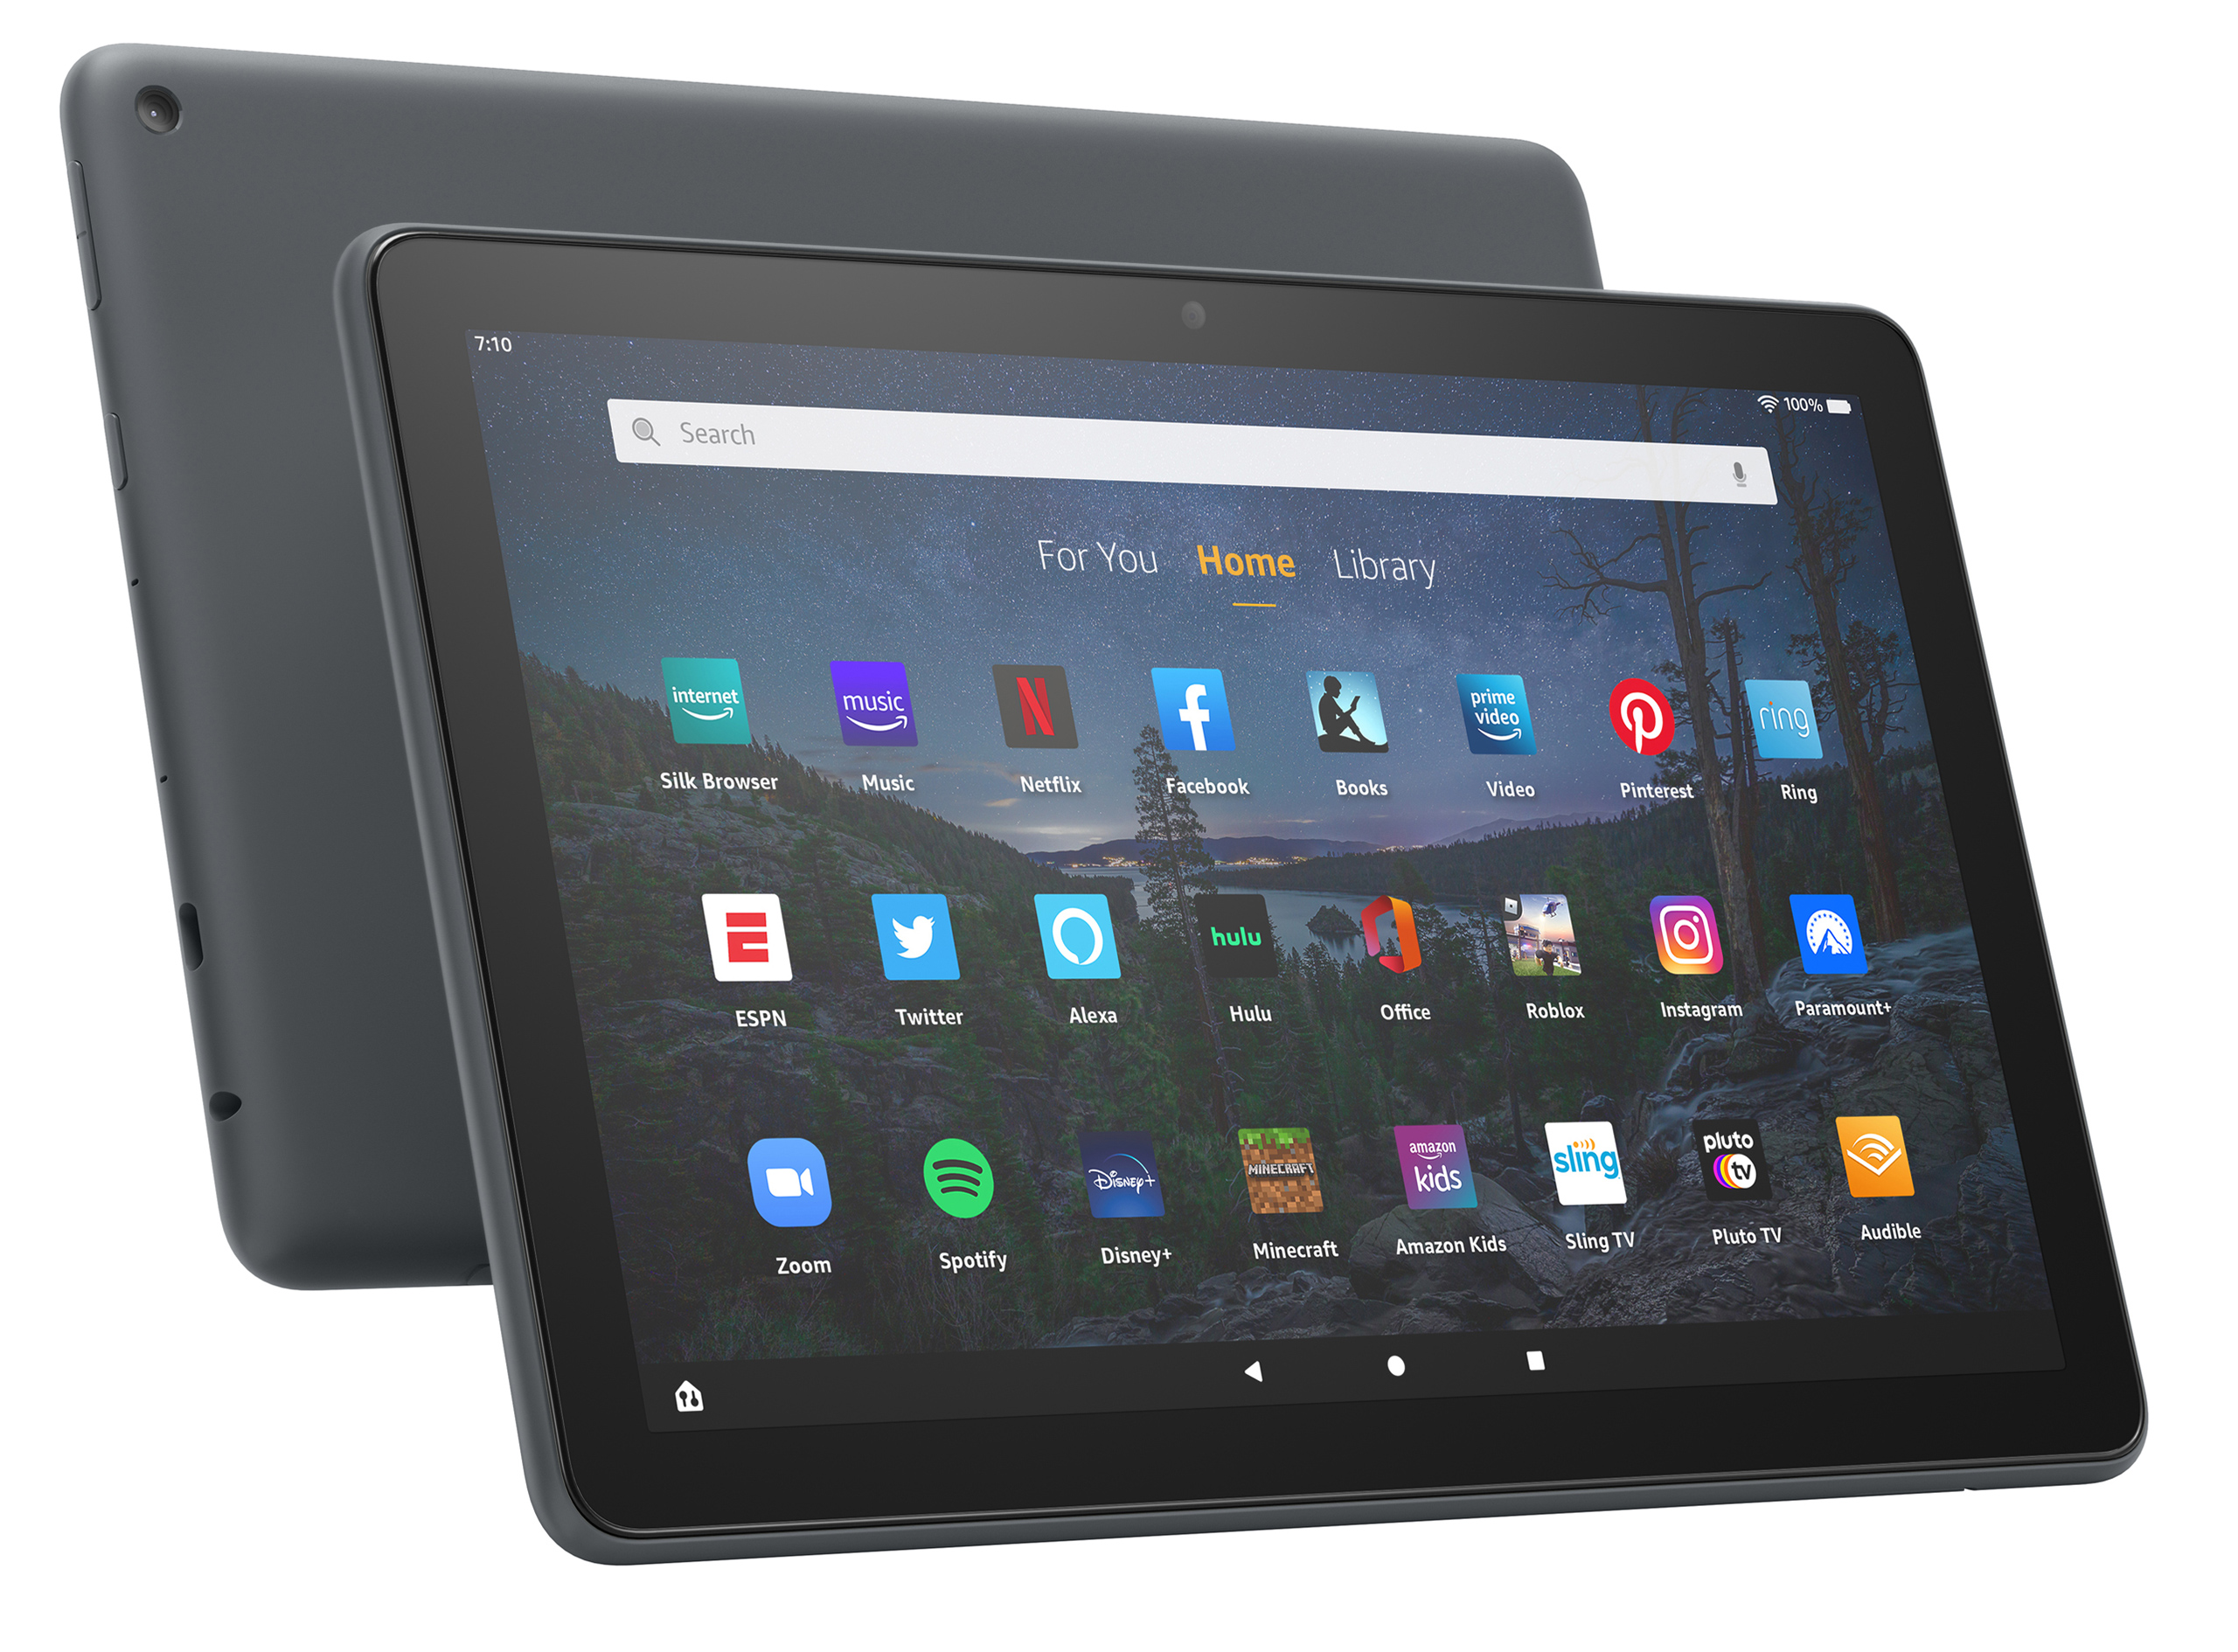 s 11th-gen Fire HD 10 tablet starts at $149.99